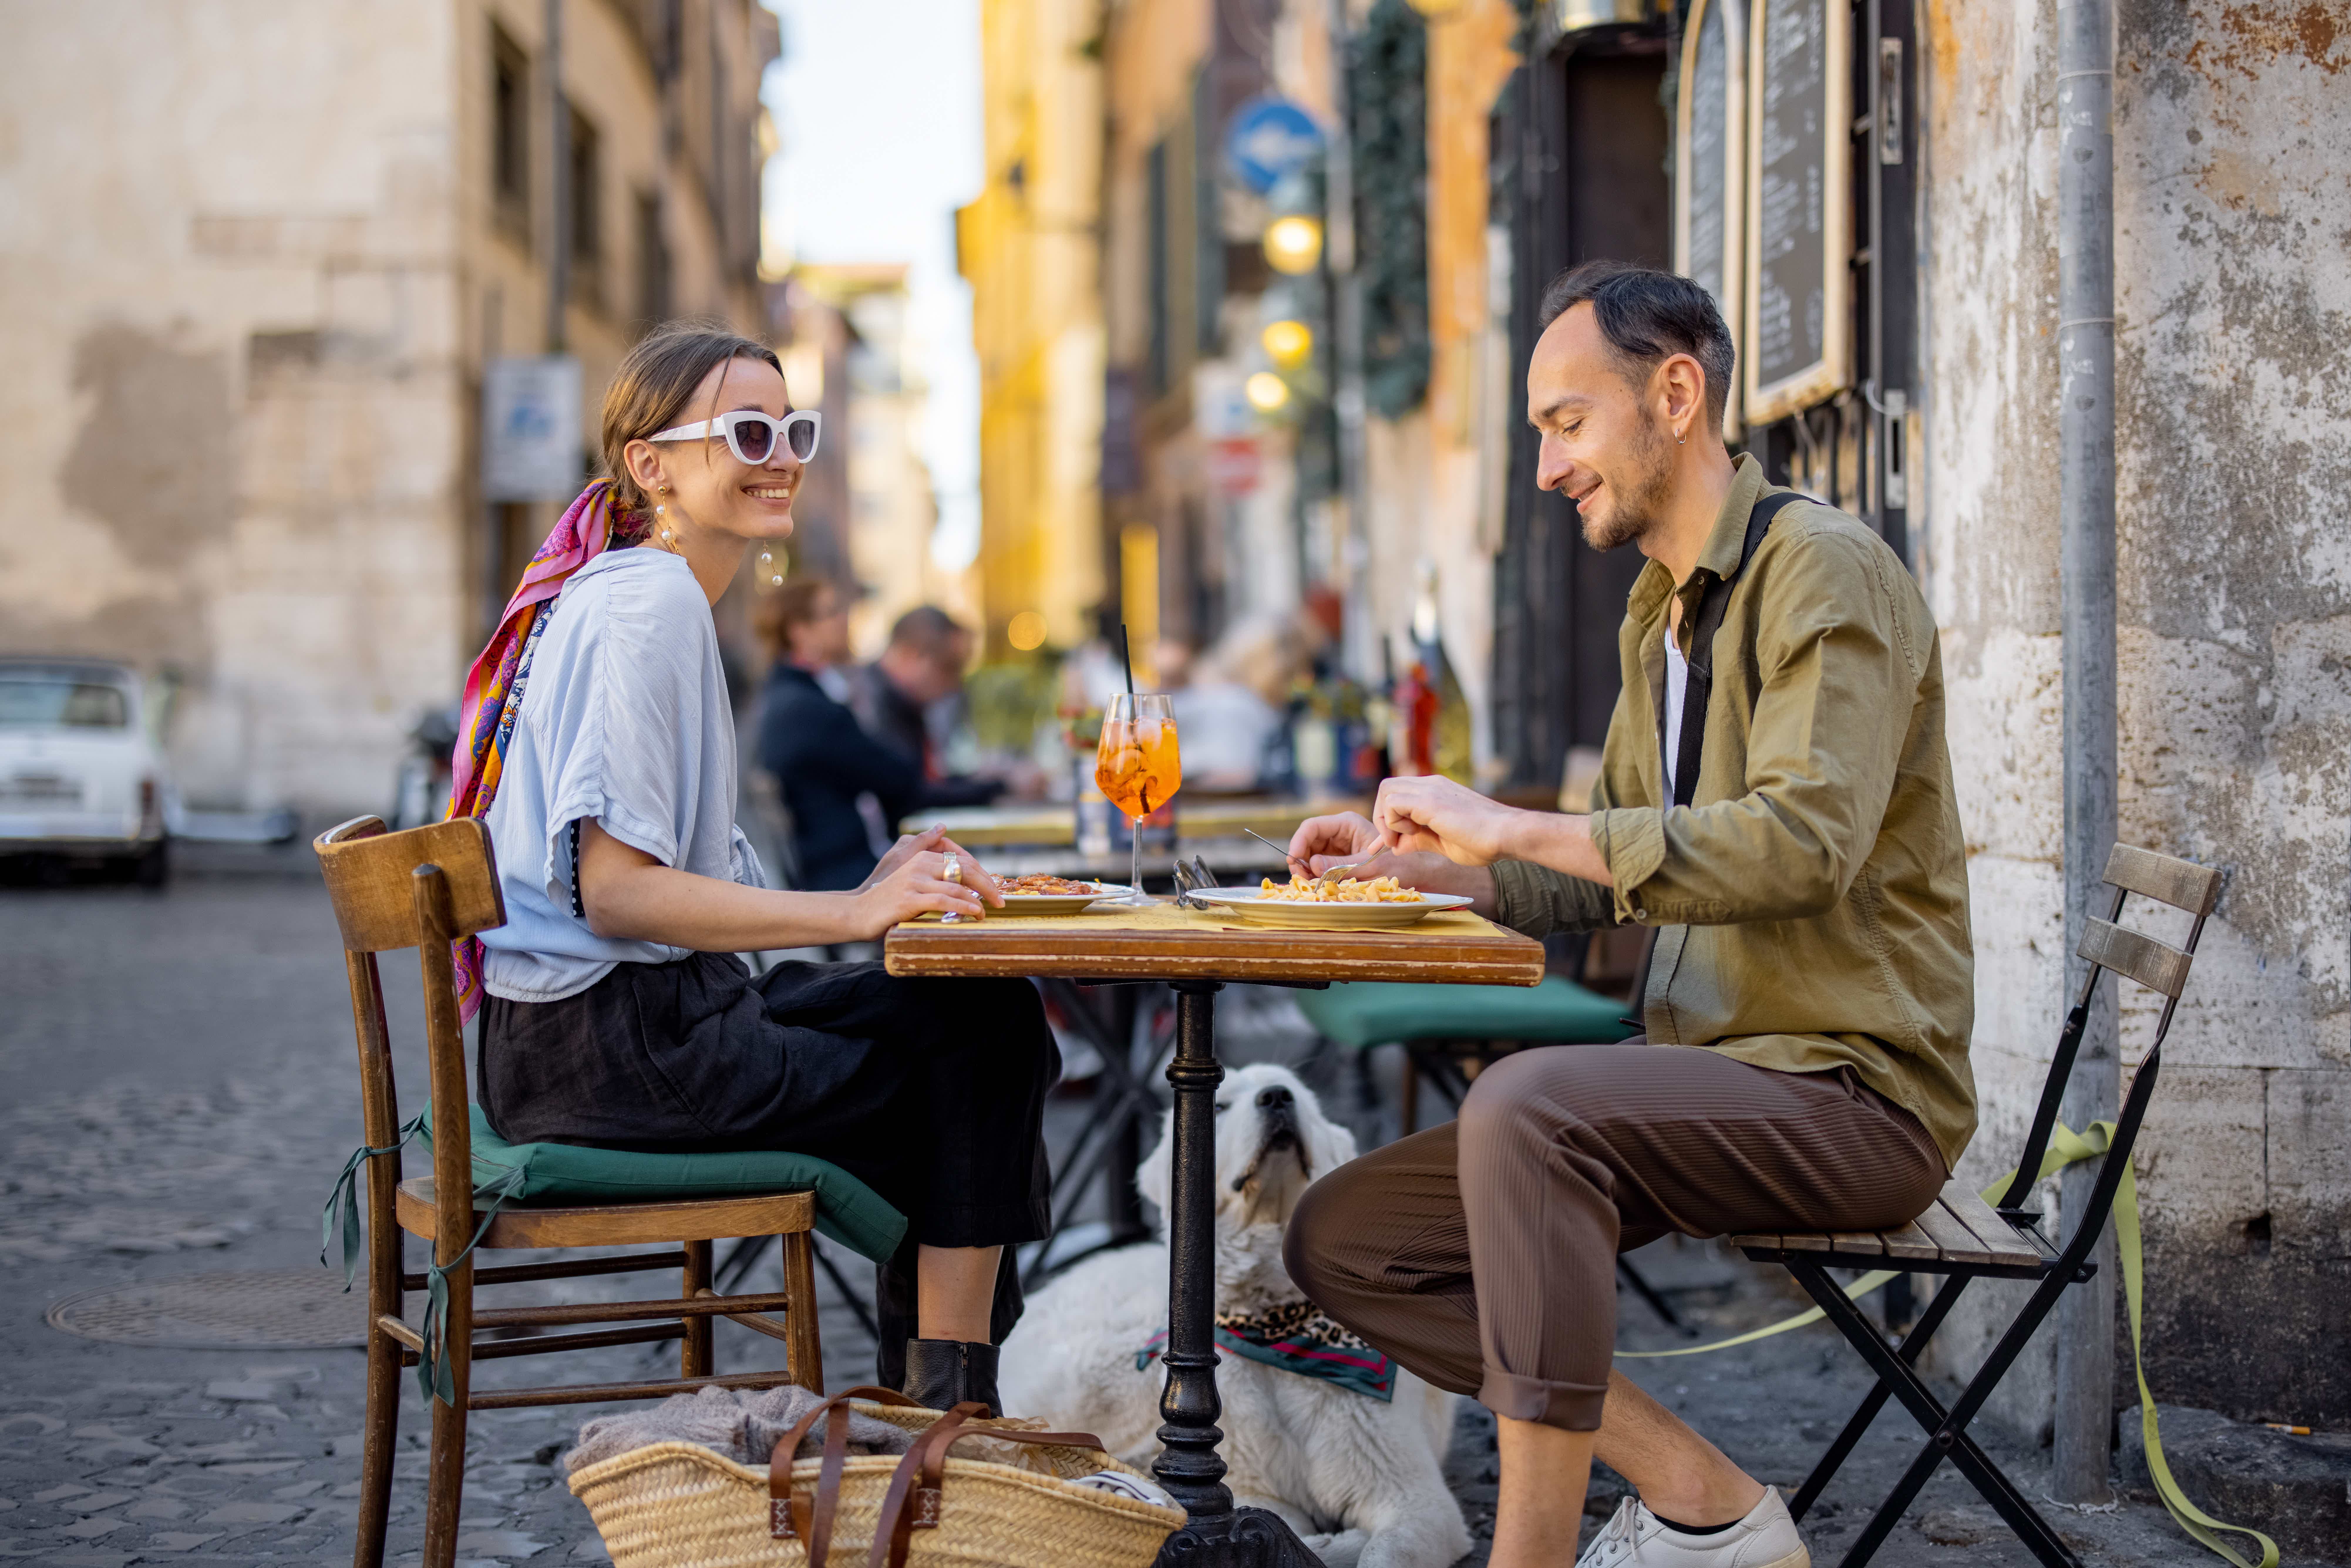 Enjoy your meal anywhere in the world and pay with American Express Cobalt® Card to earn extra cashback. Source: Adobe Stock.